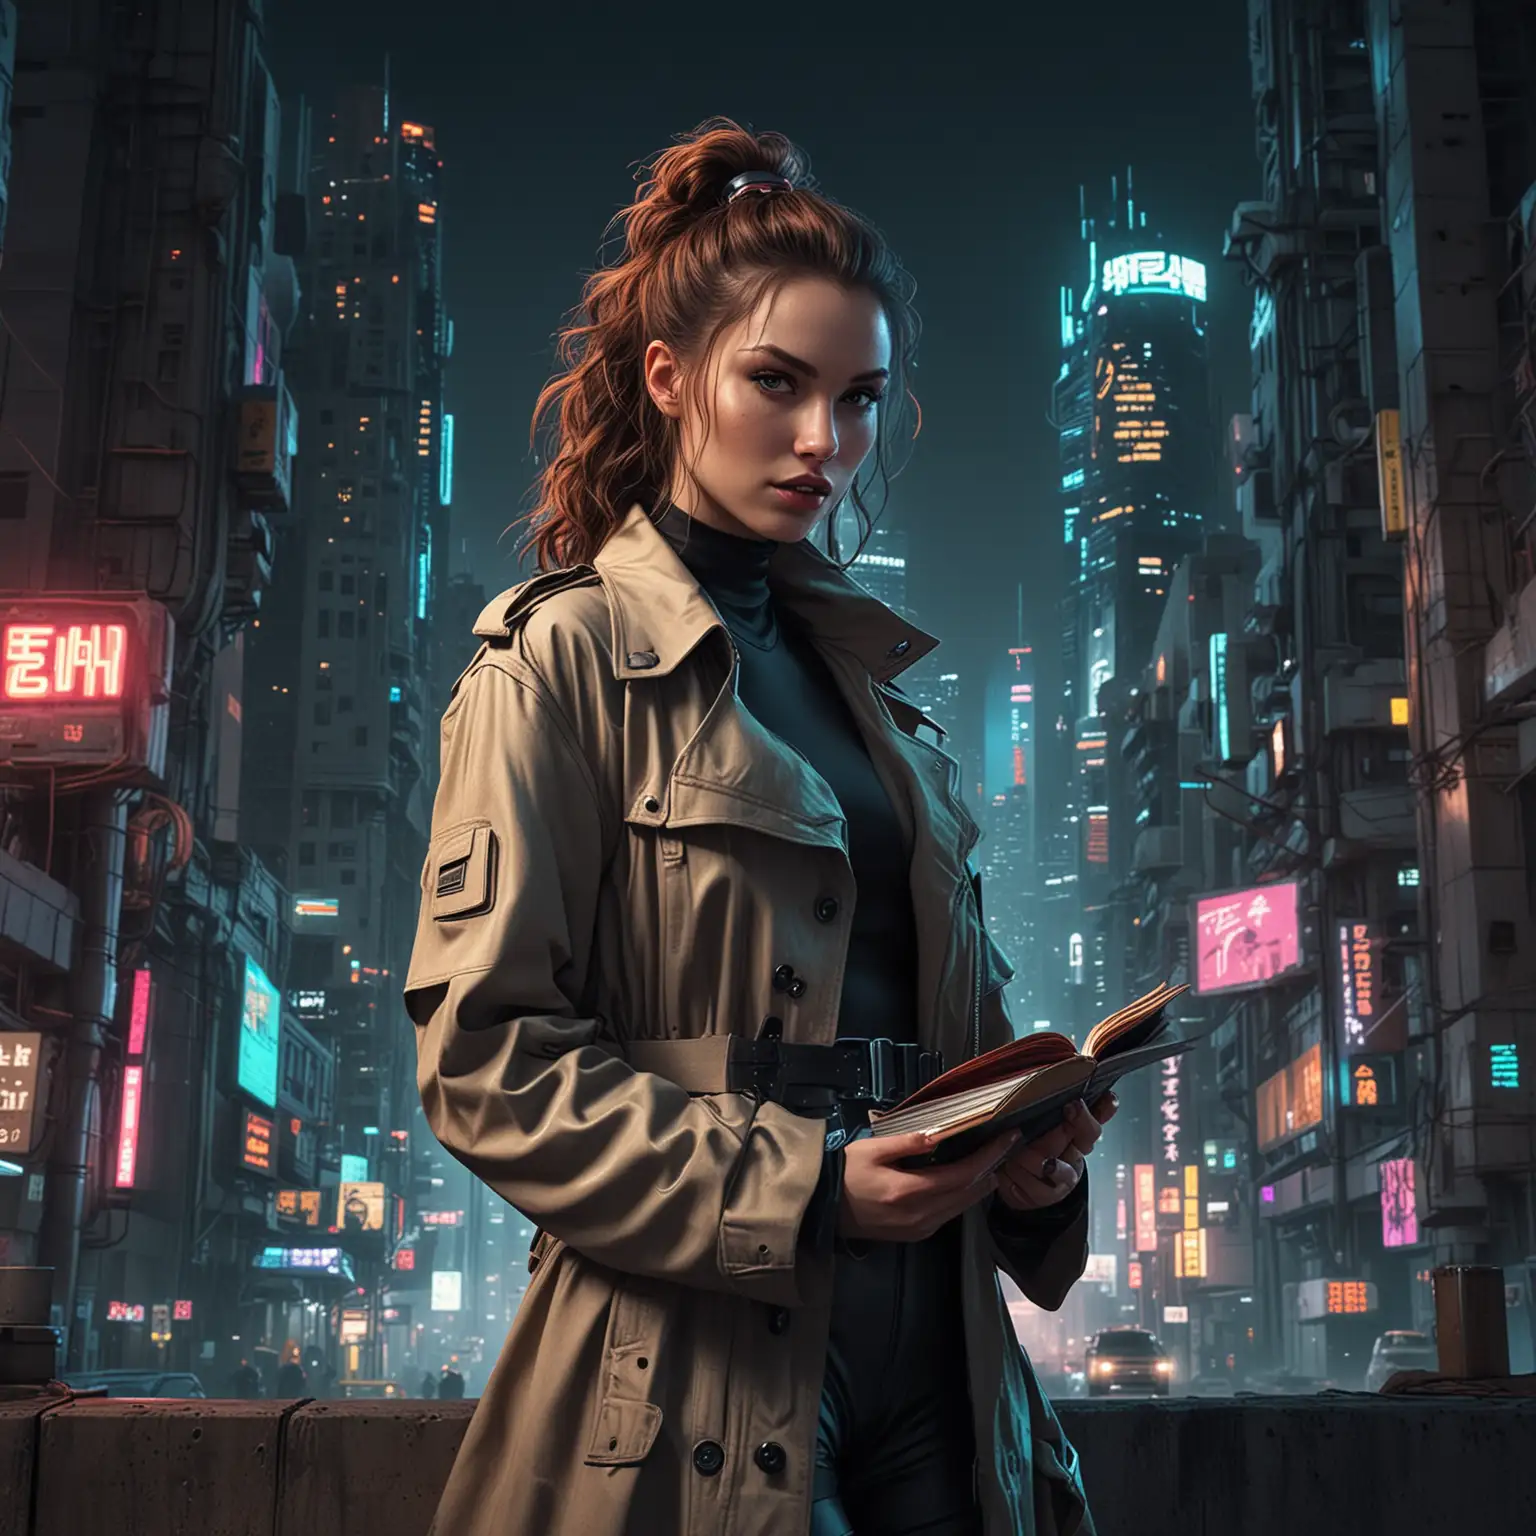 CITY BUILT IN A LARGE CANYON AT NIGHT? MOON LIGHT. The city is a cyberpunk futuristic  brutalist architecture with a lot of concrete and neon lights, female rebel, dressed like cyberpunk laura croft, with curly hair, wearing long trench coat, holding a stack of books